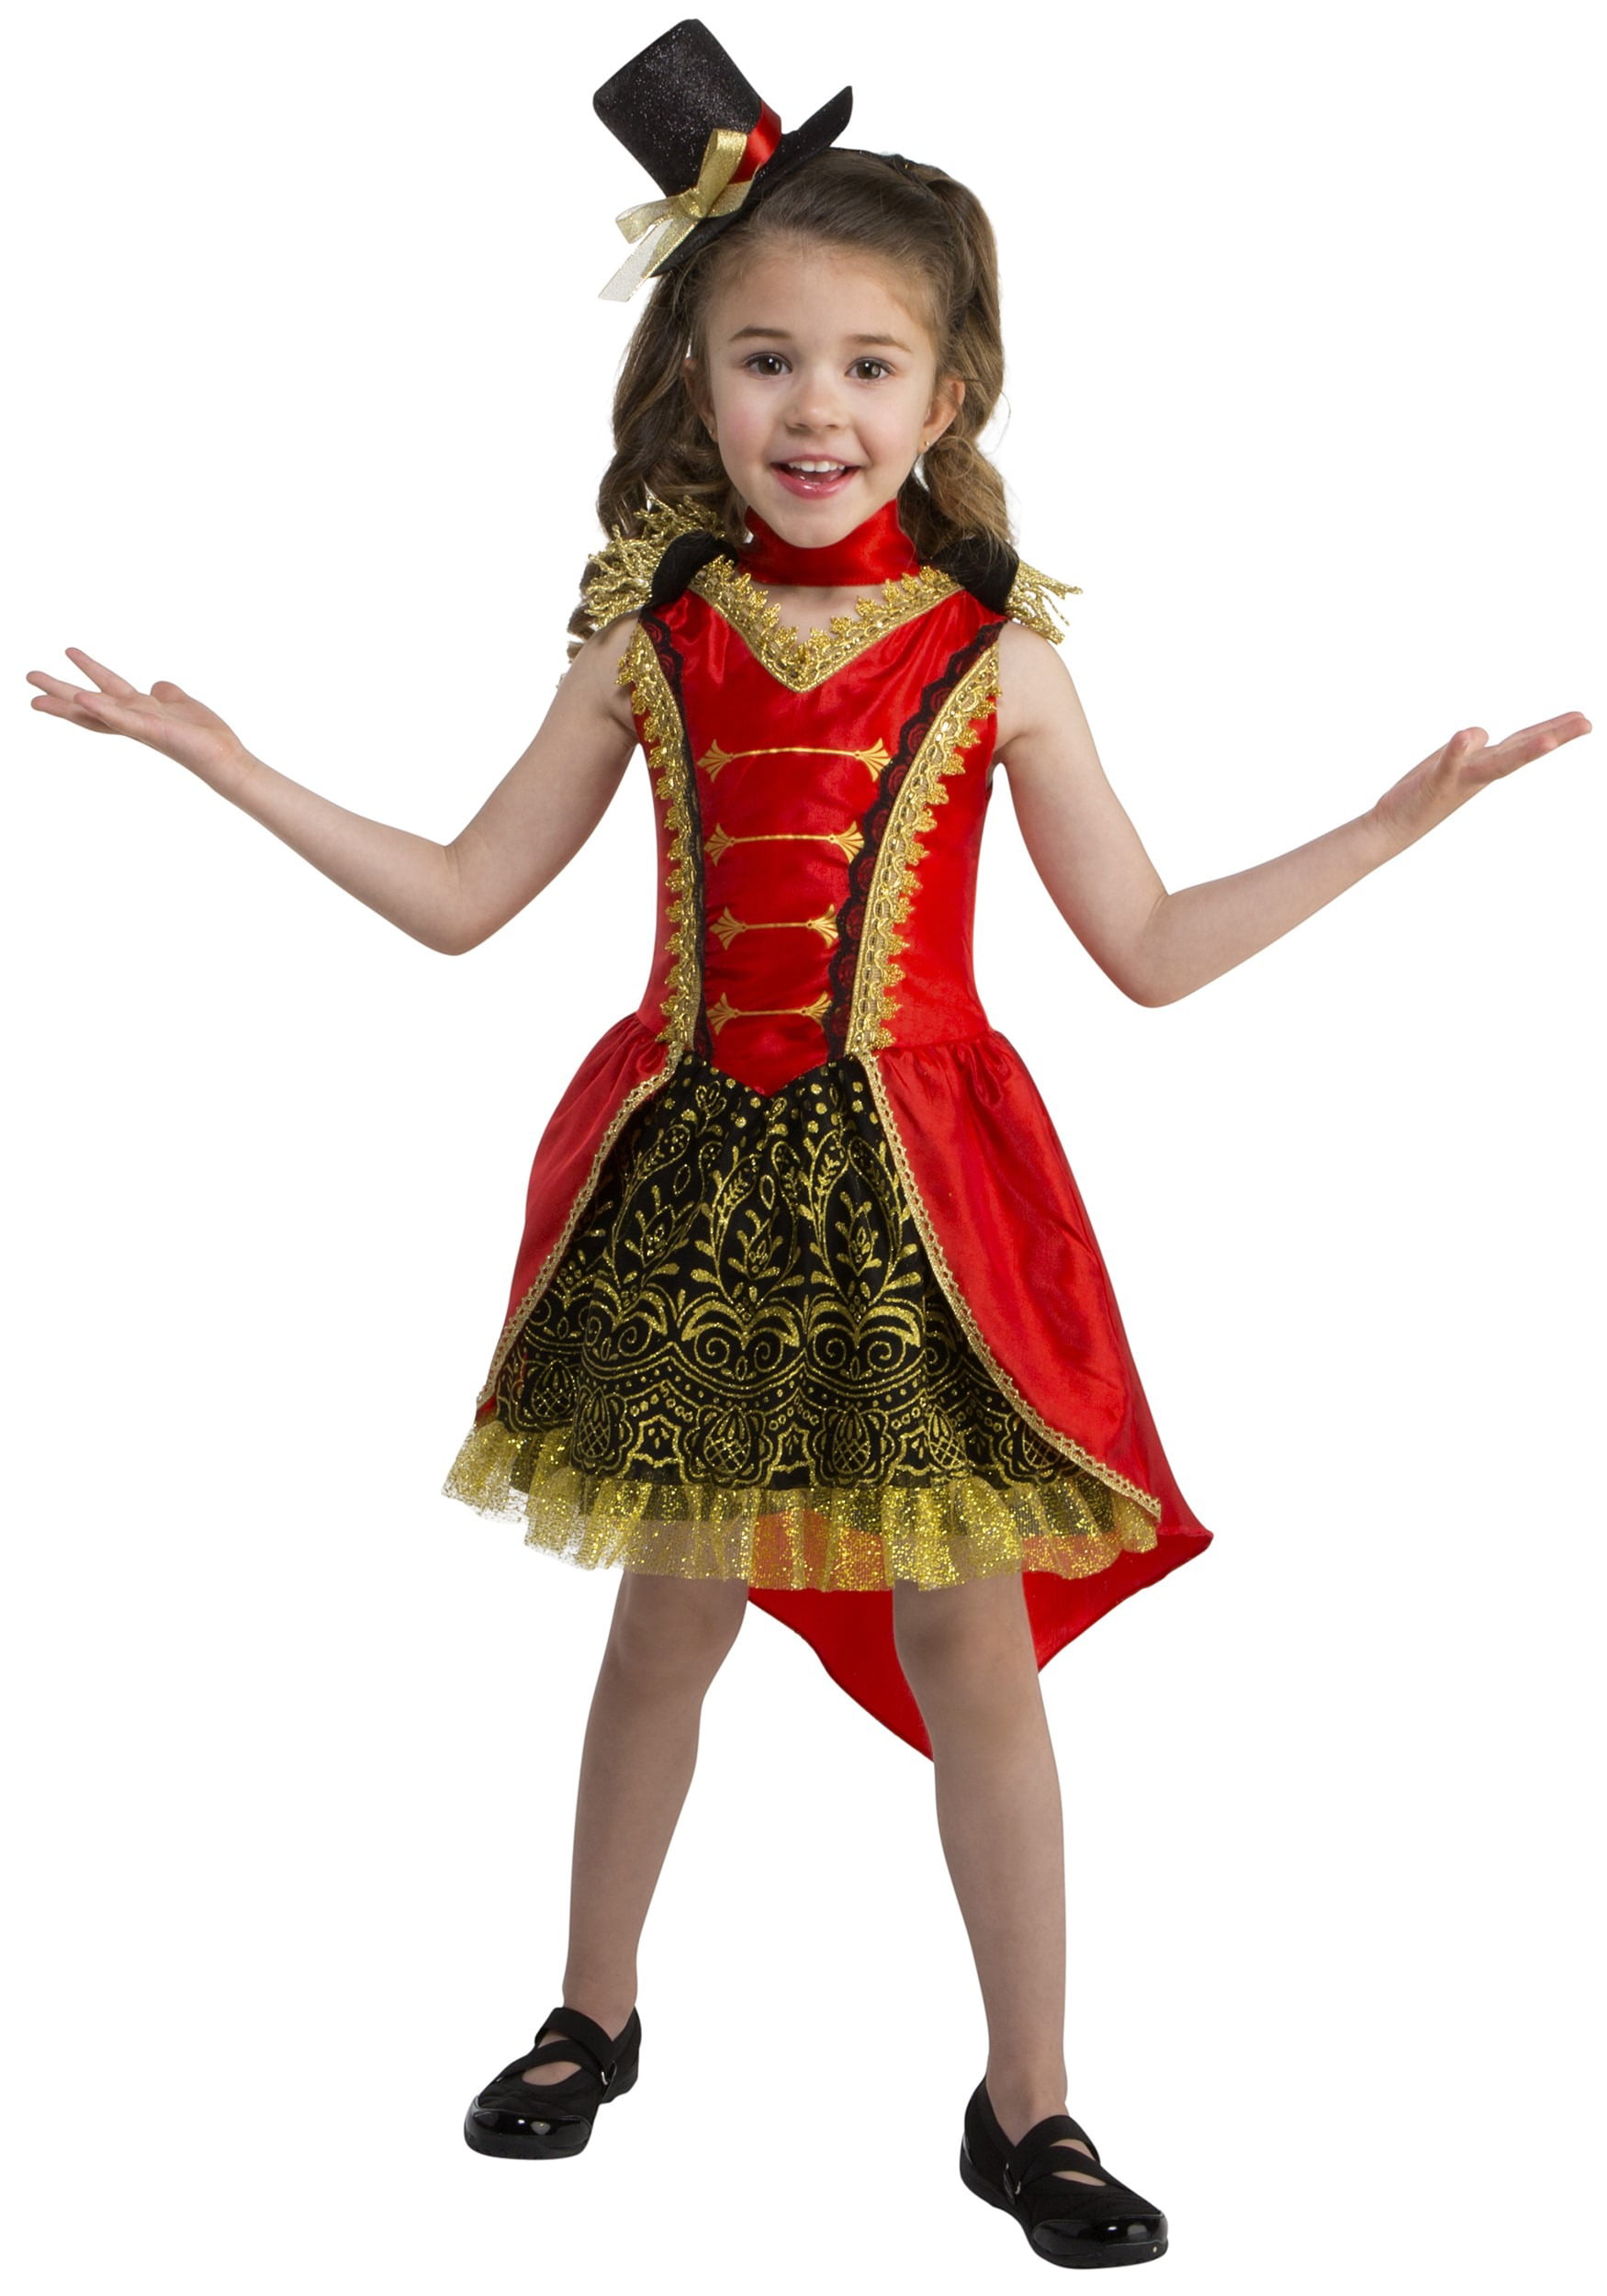 Girls Ringmaster Costume Kid Circus Themed Party Cosplay Fancy Dress Set Clothes 